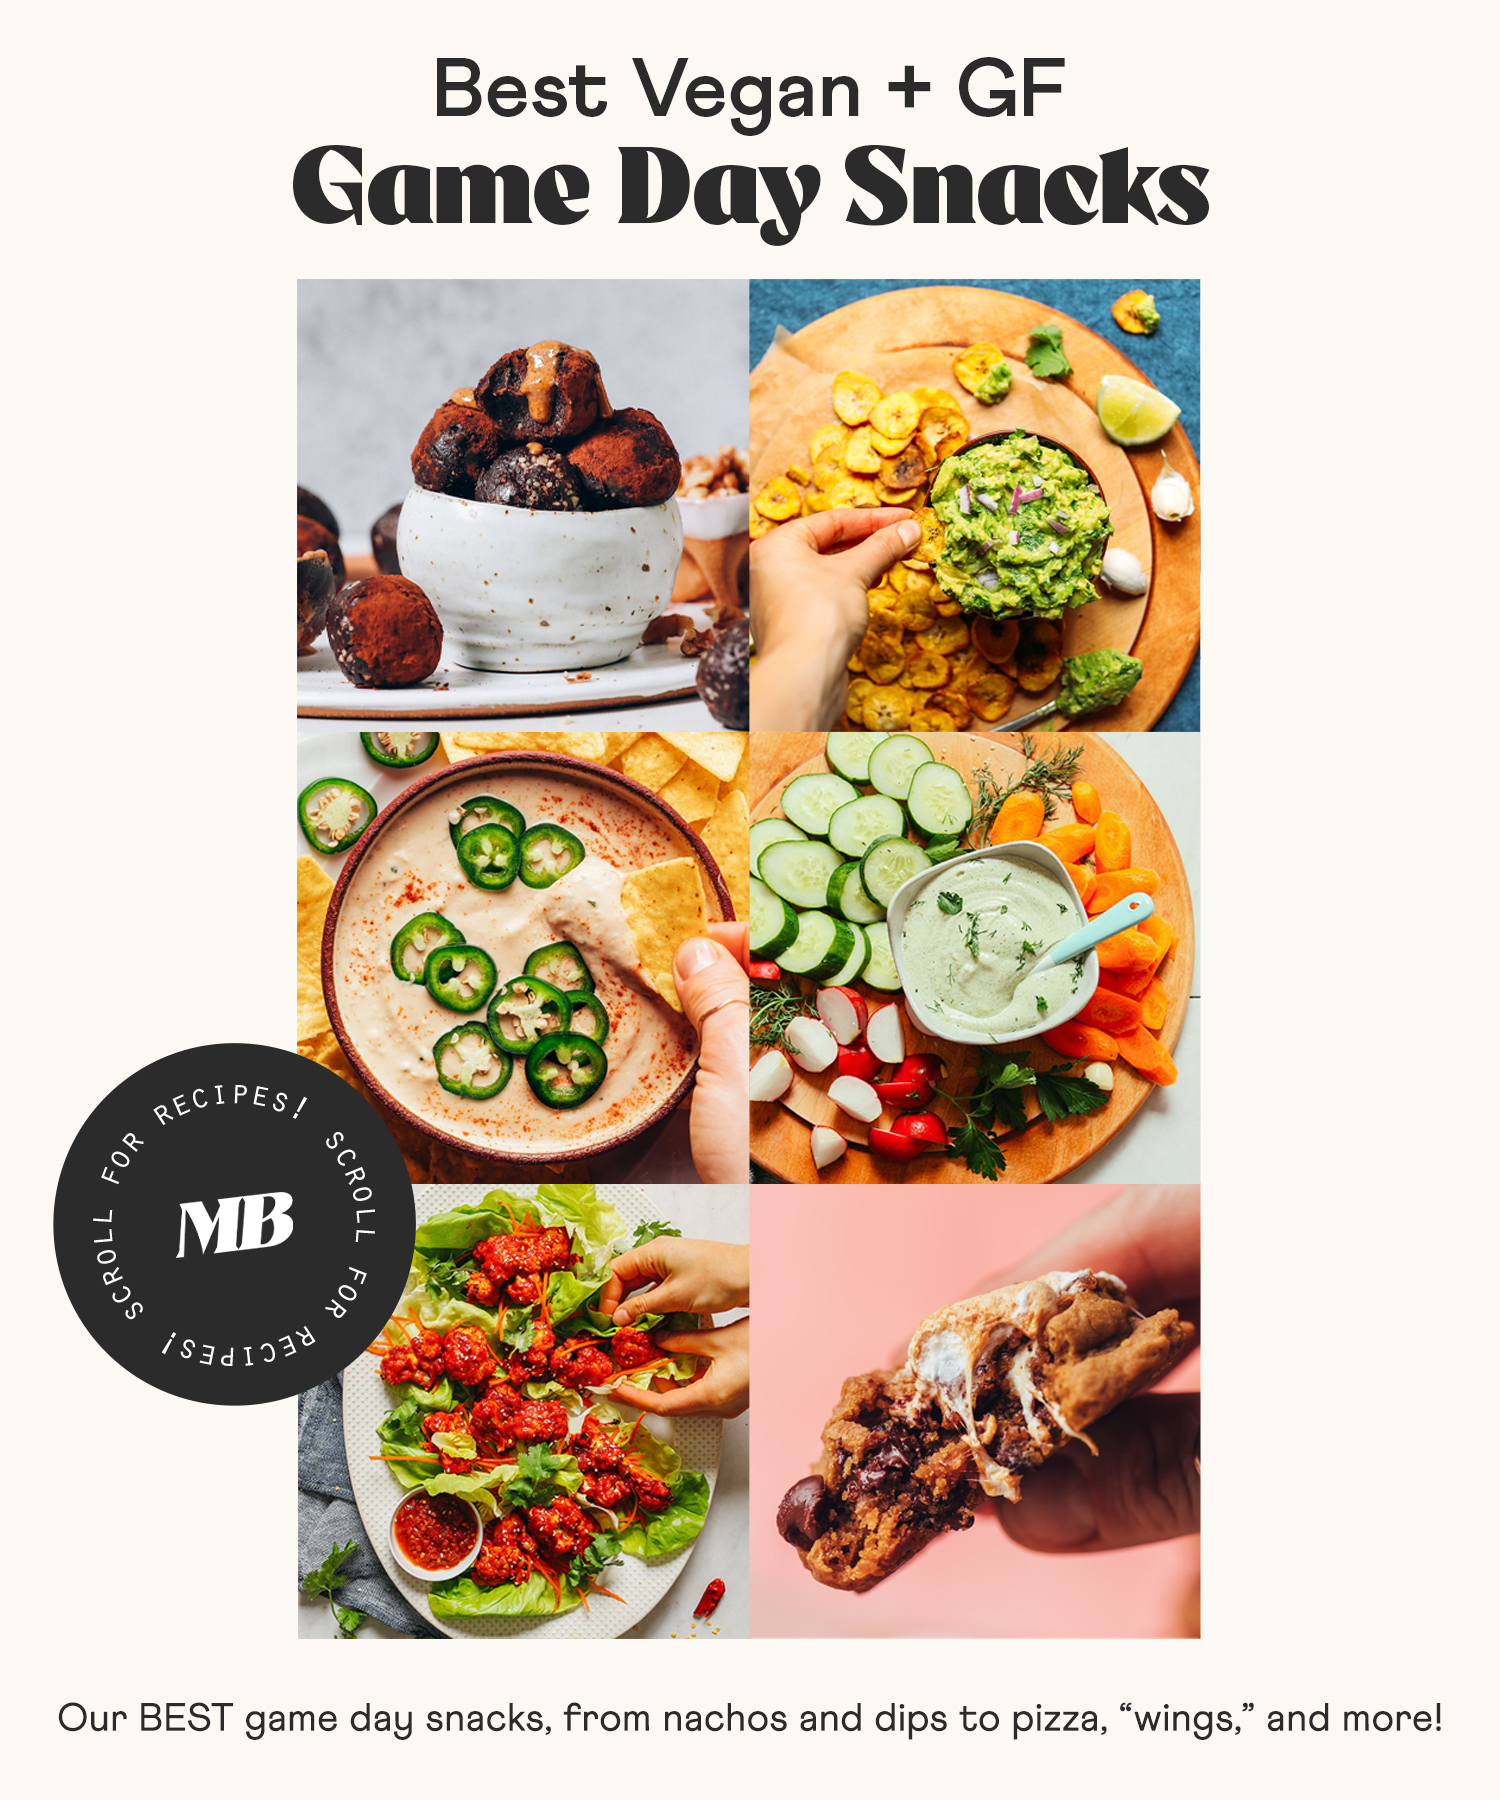 Dips, vegan wings, cookies, and more game day snacks for the Super Bowl